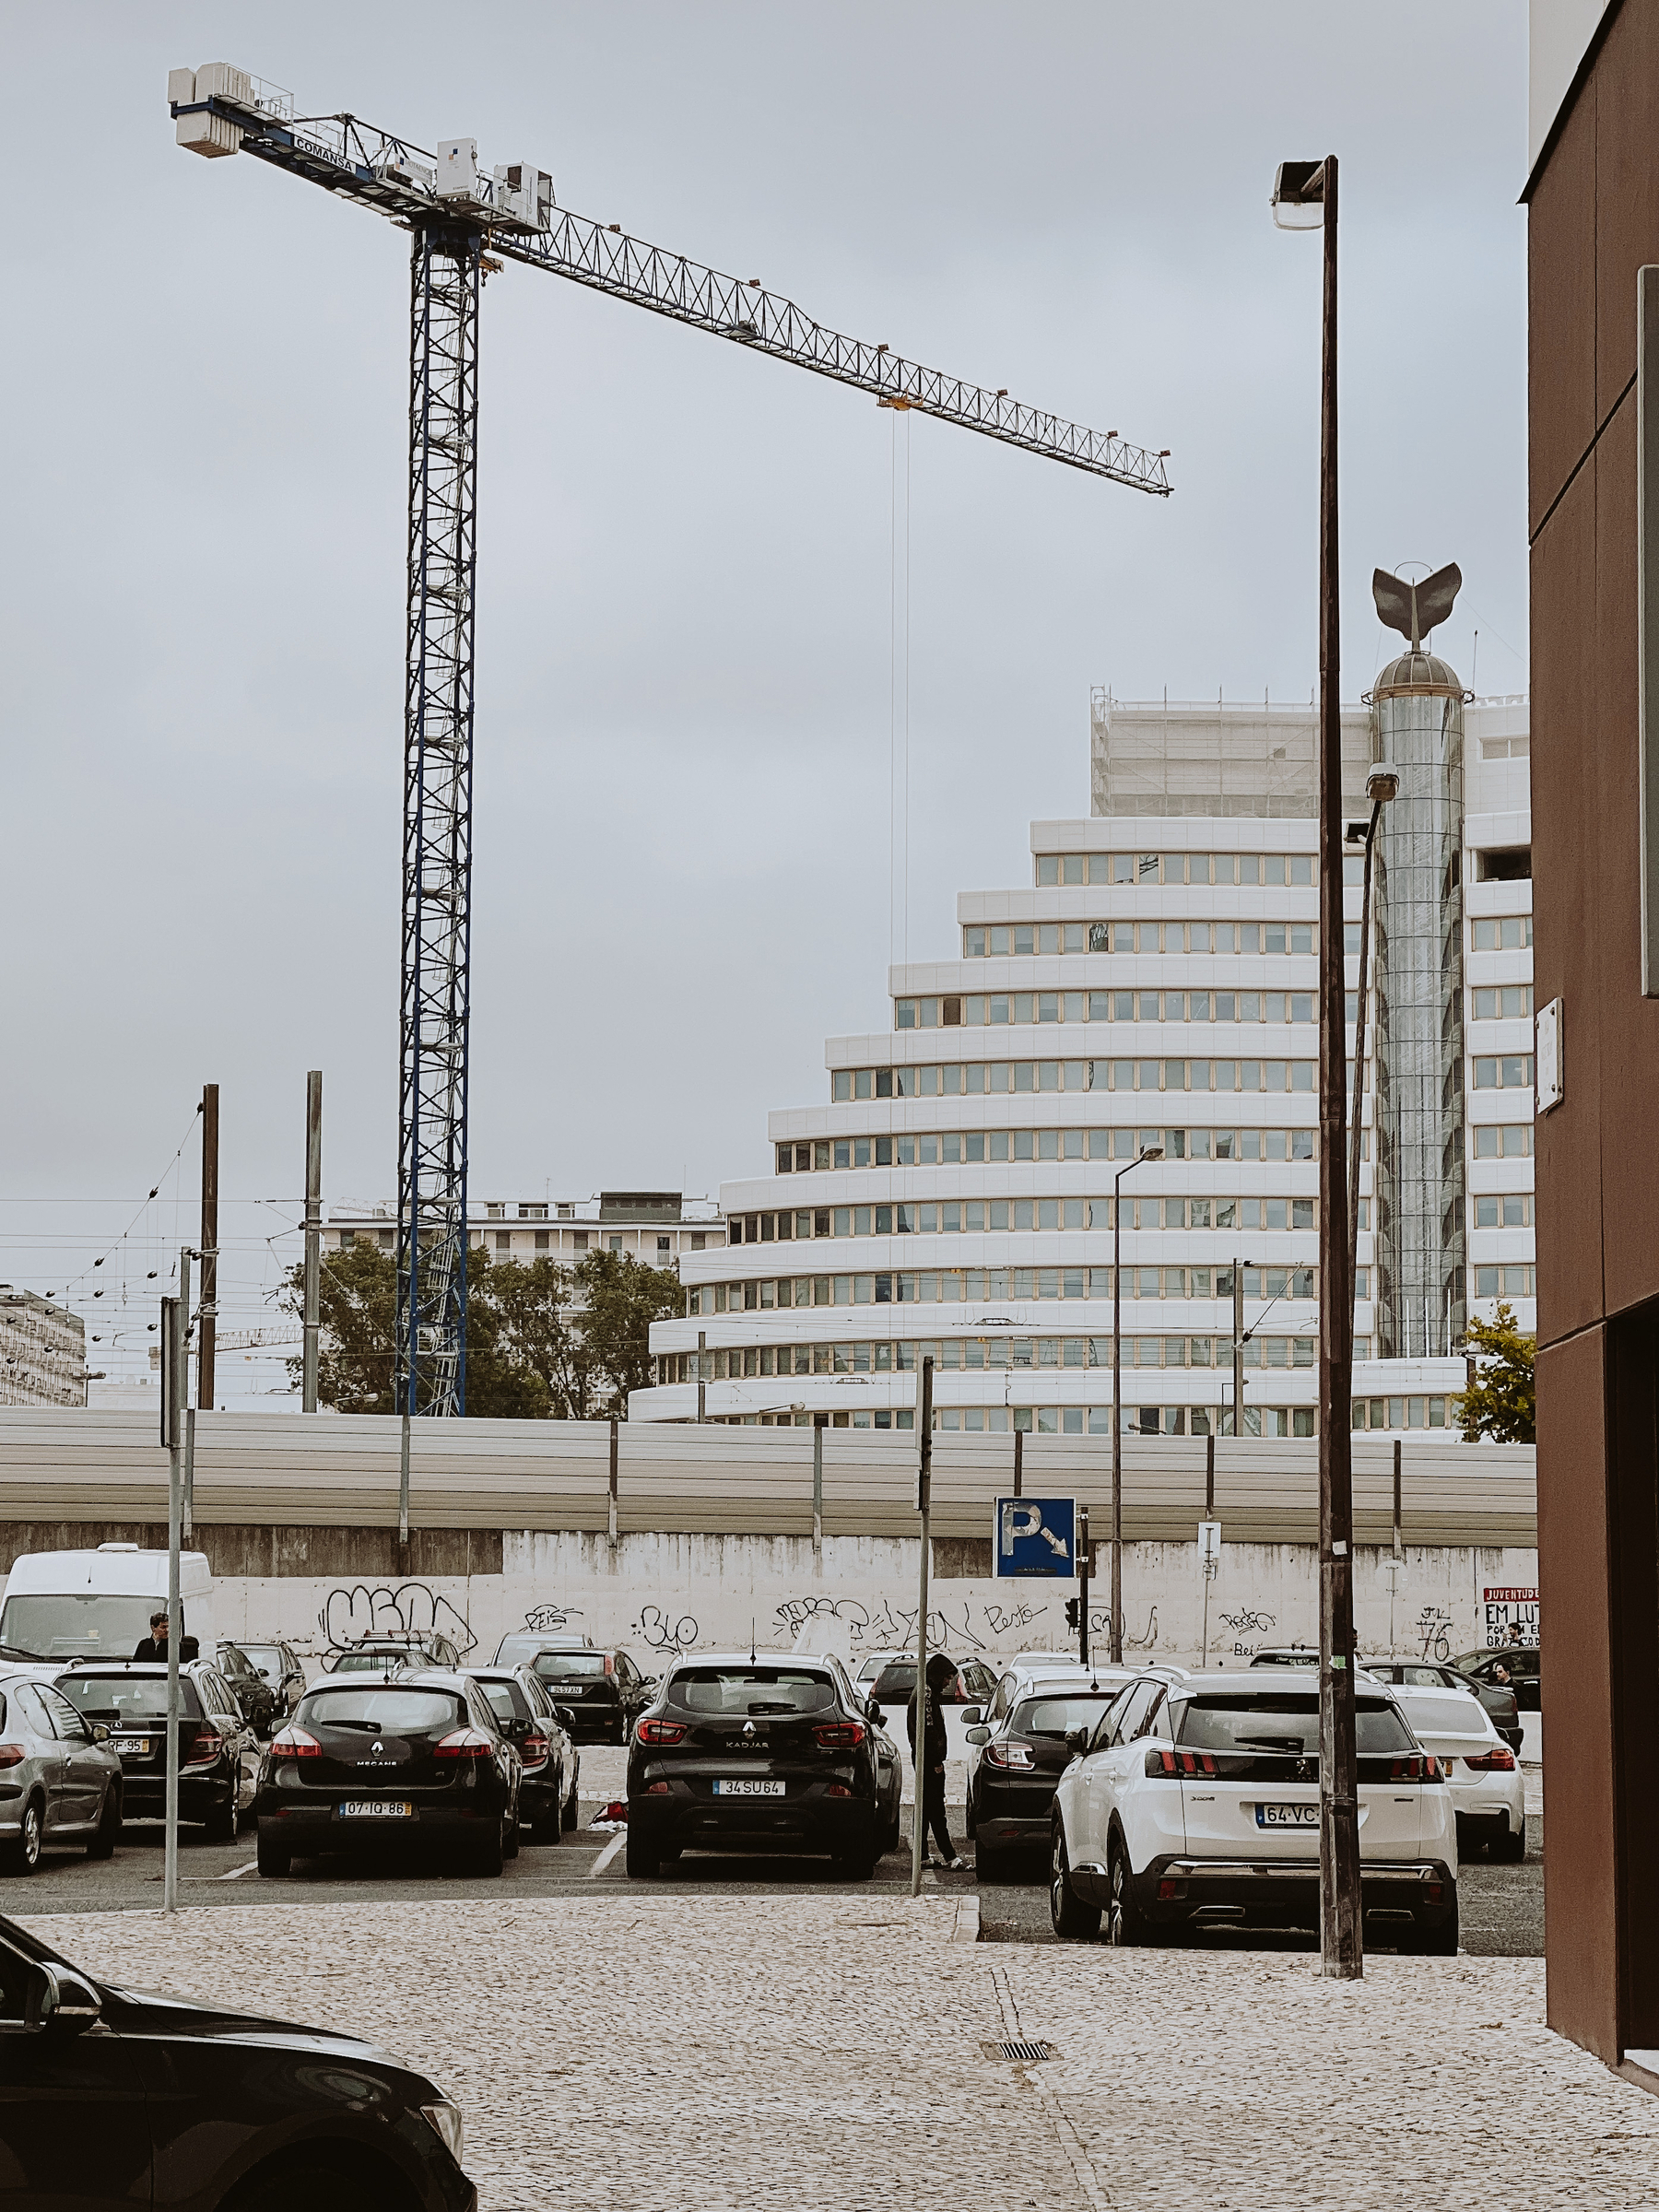 A huge crane, a building that looks like a staircase, and a car park. 